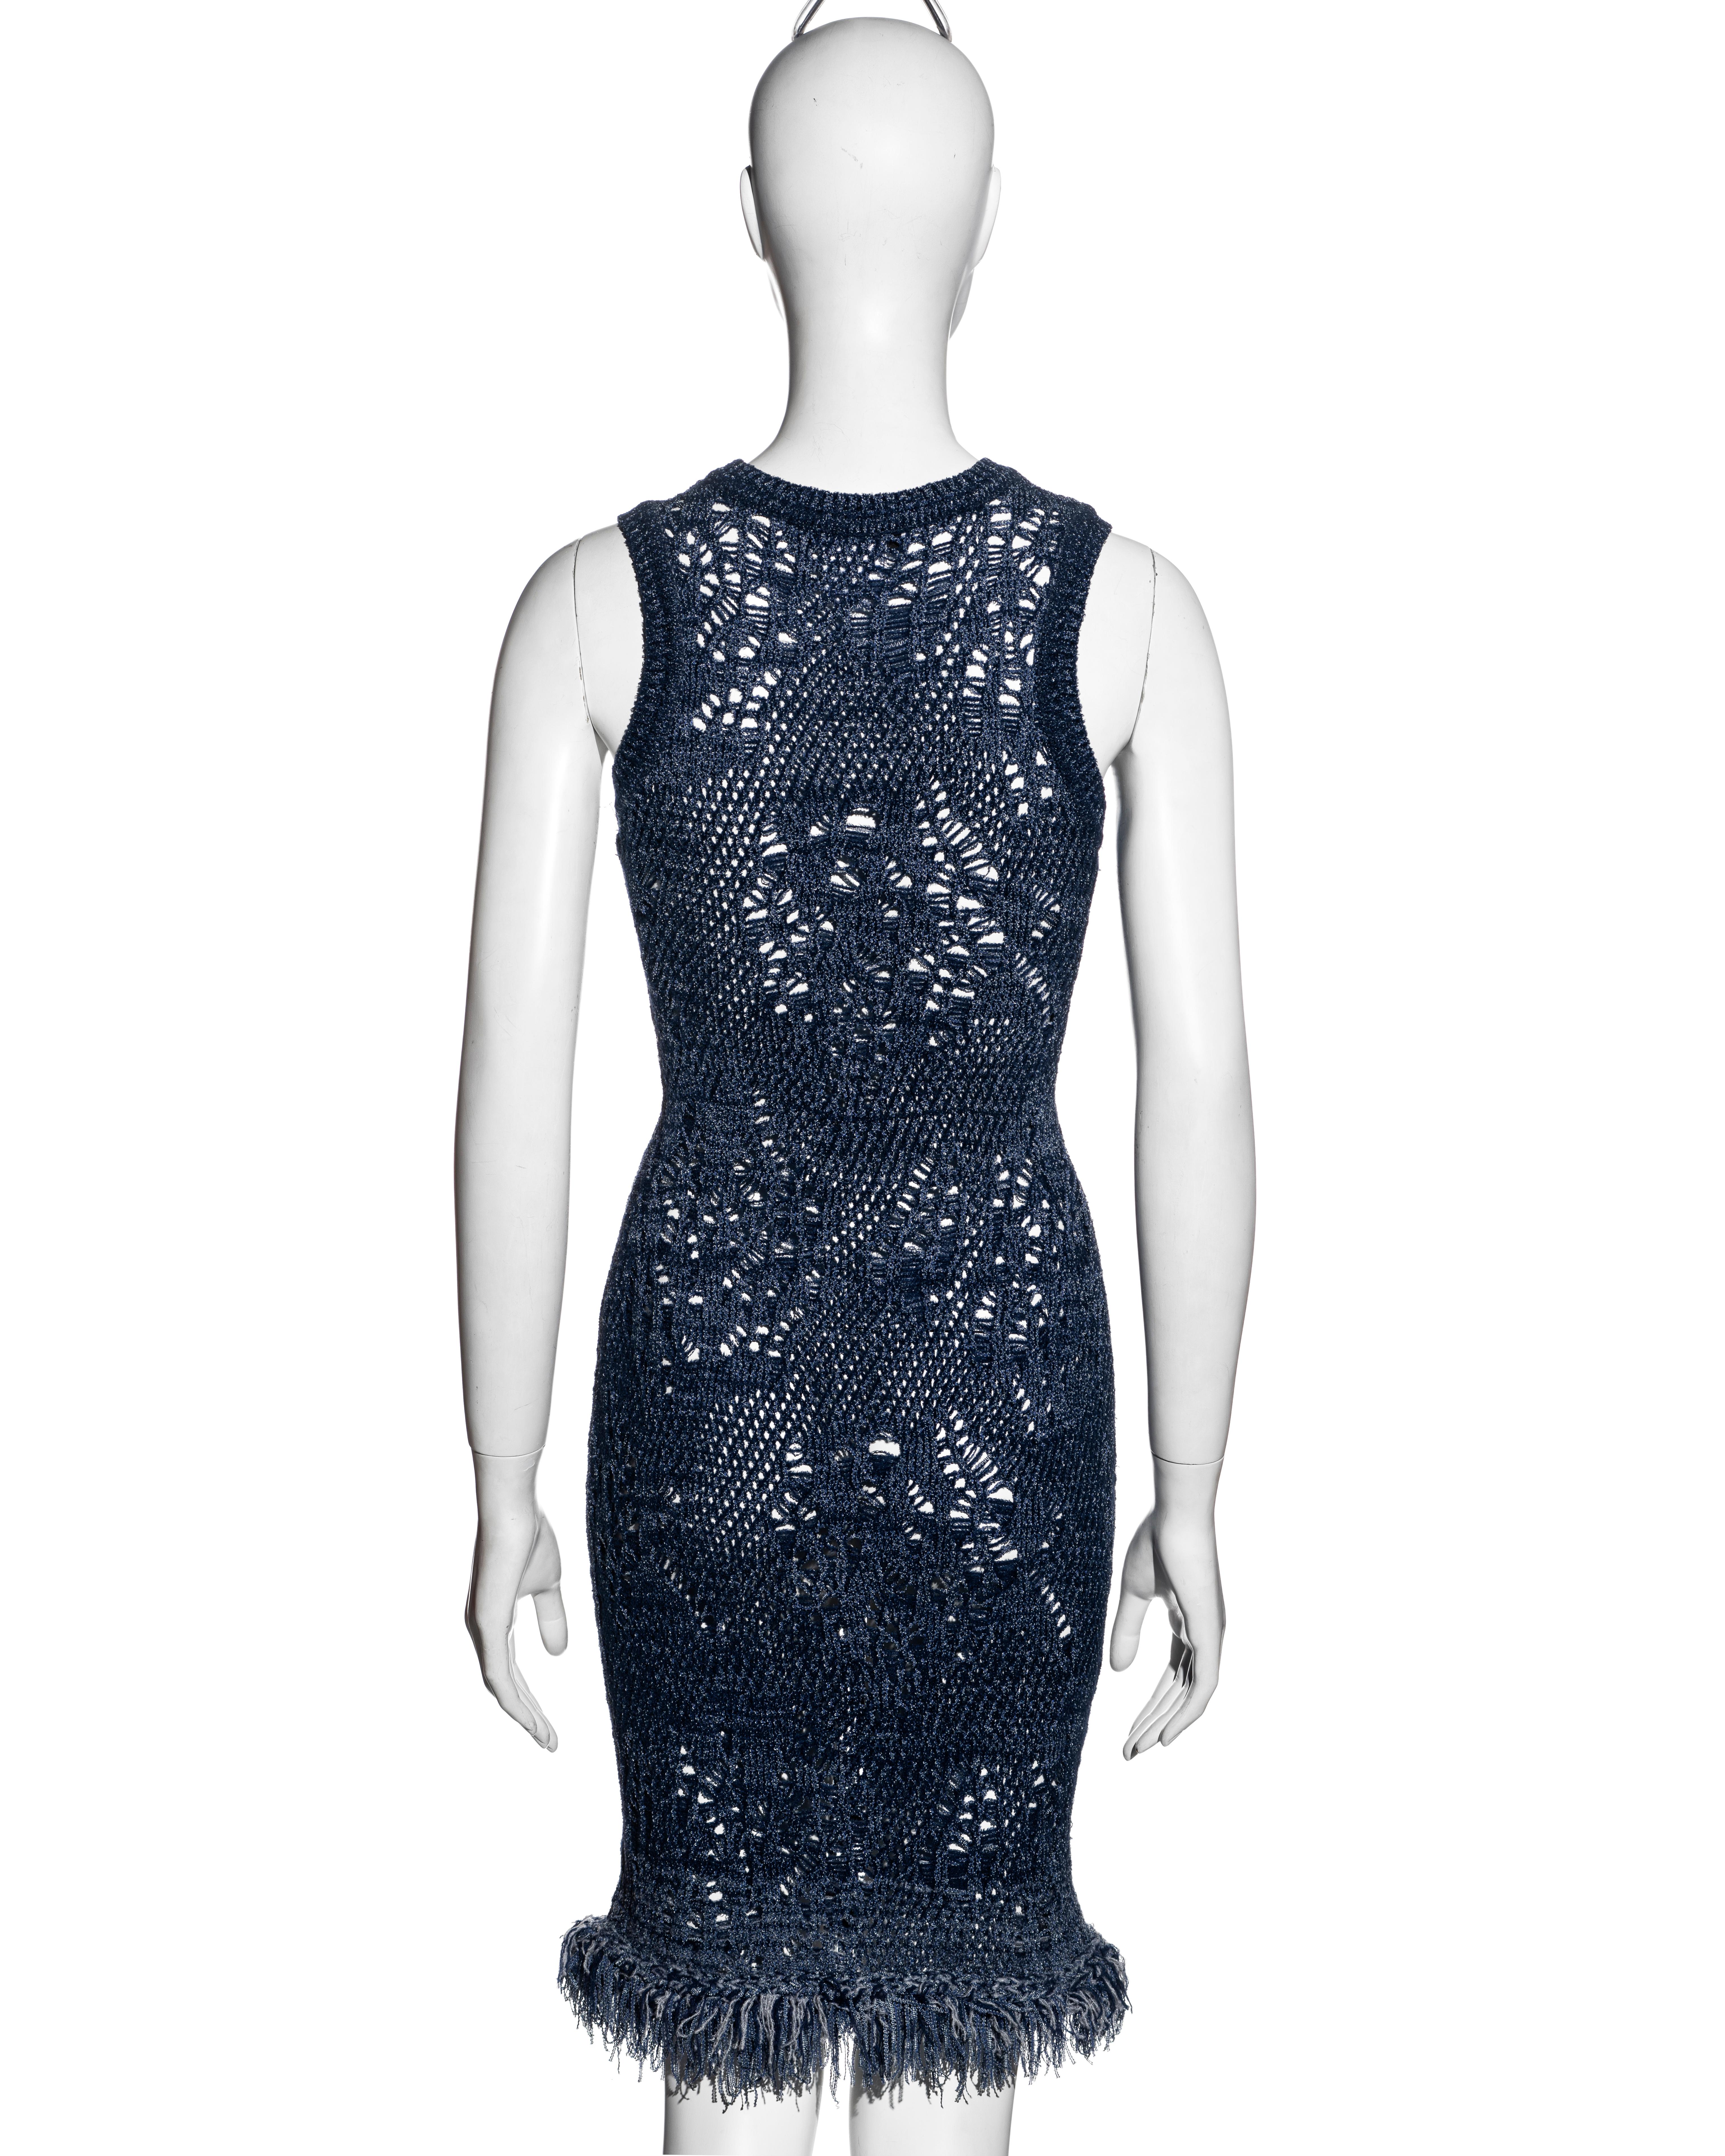 Christian Dior by John Galliano blue open-knit sleeveless bodycon dress, ss 2000 For Sale 1